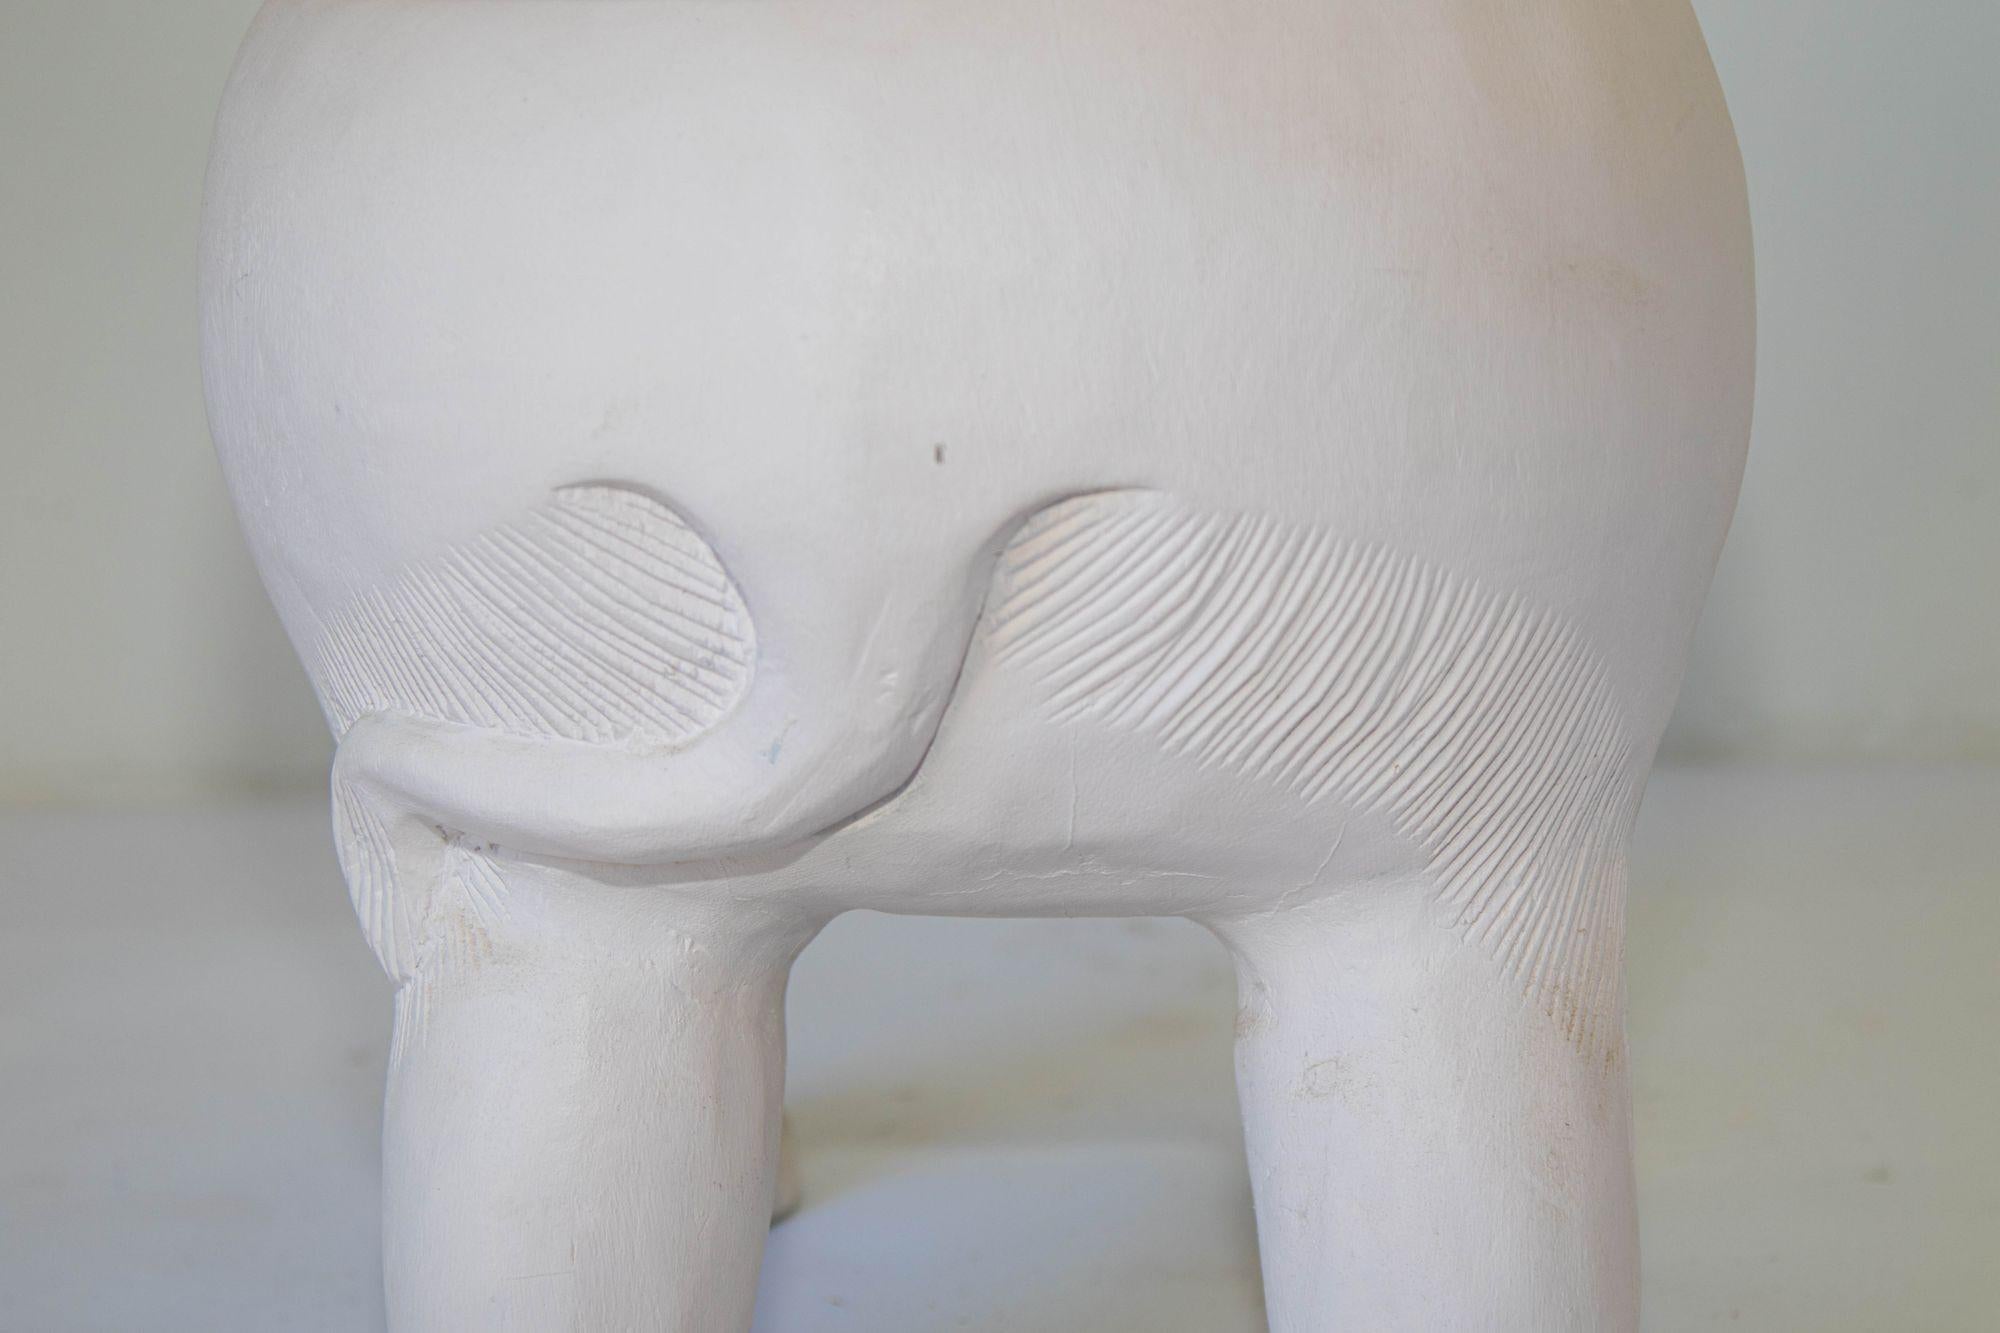 Large Vintage White Hand-Carved Wood Elephant Stand Side Table For Sale 7